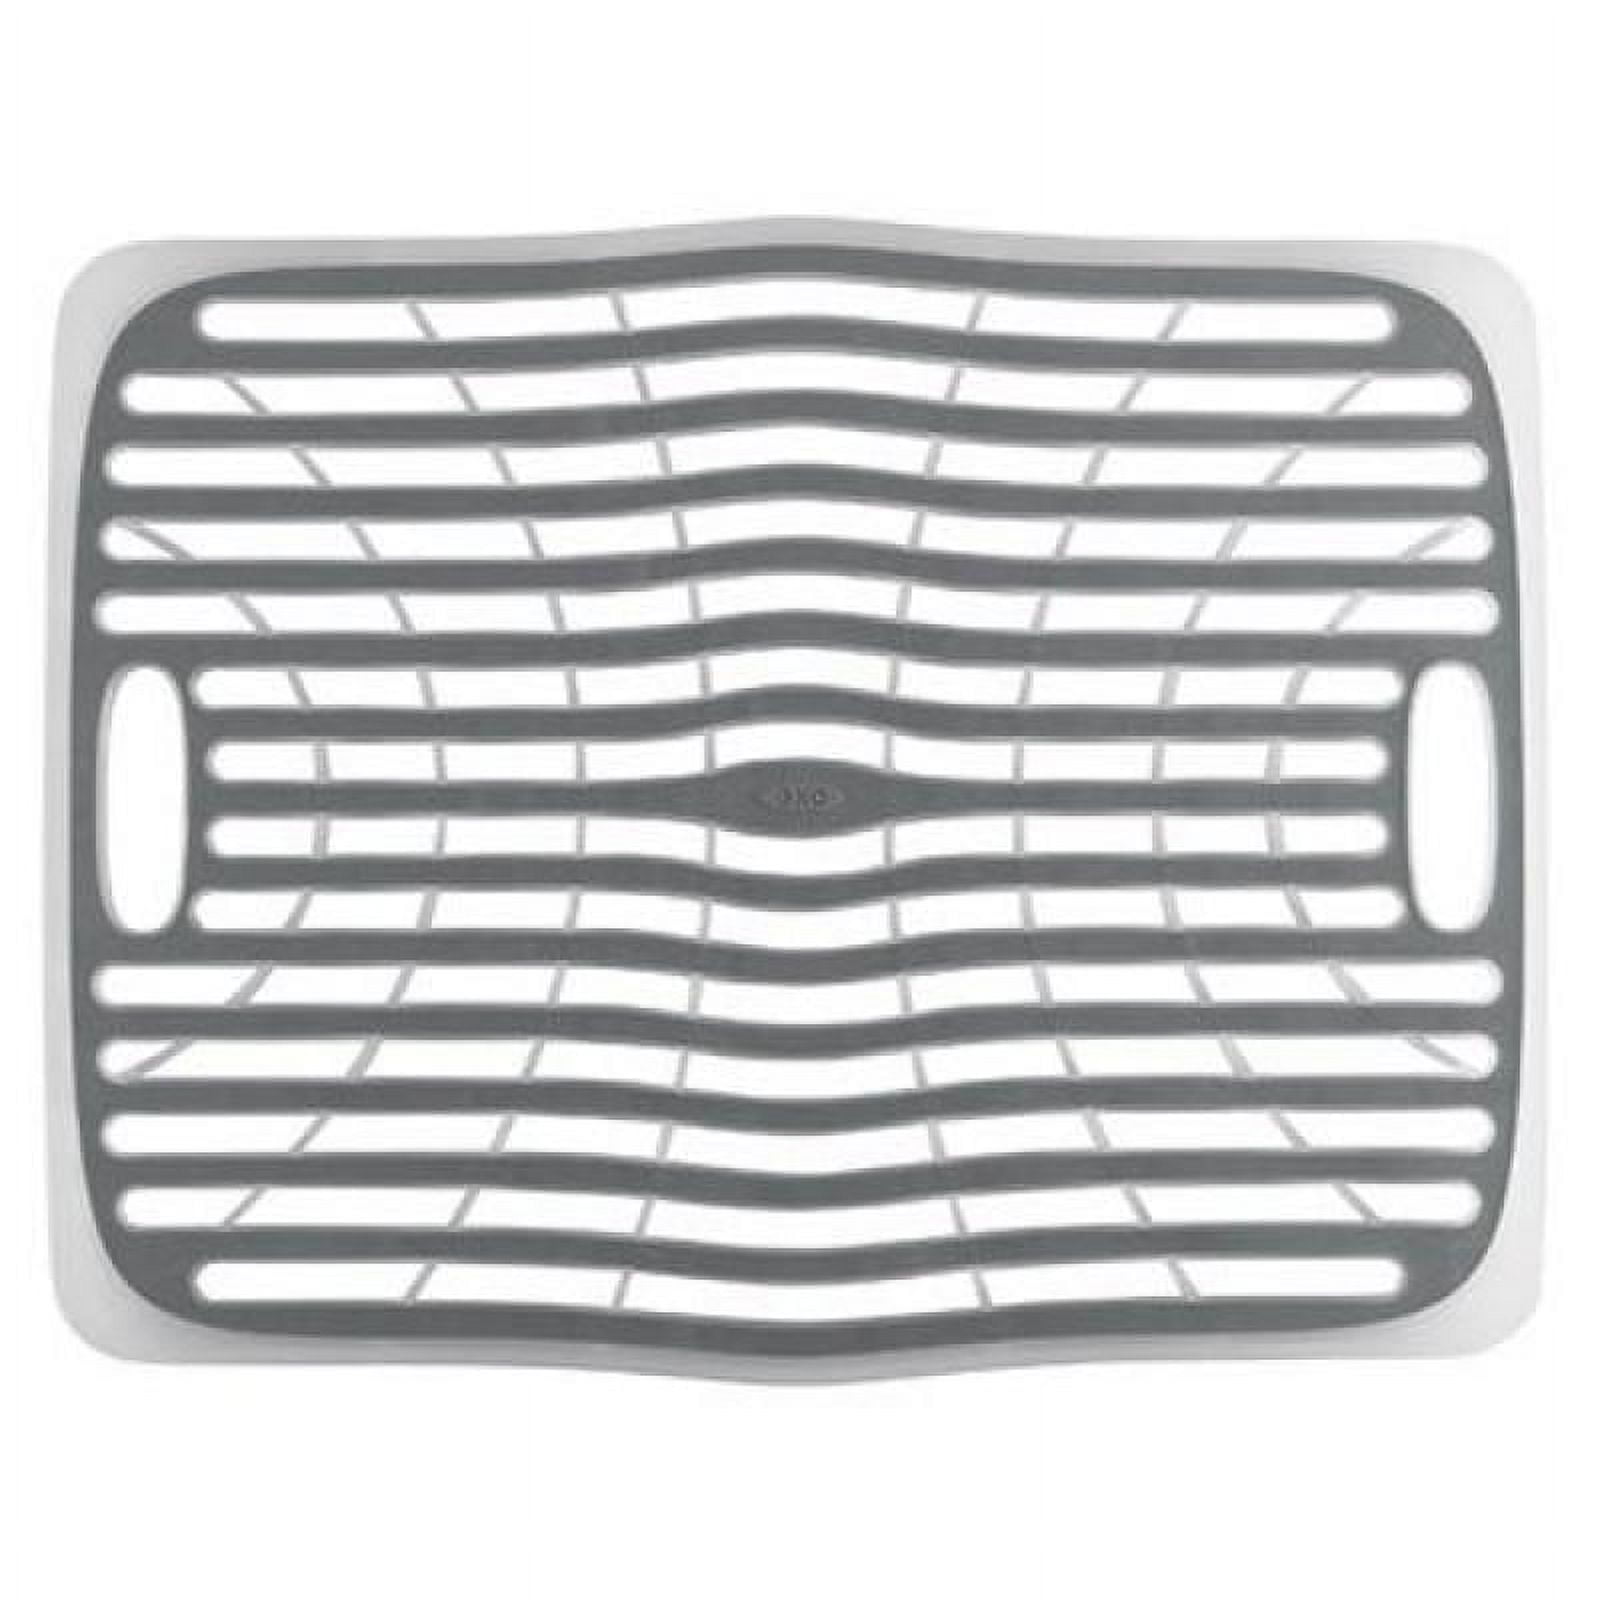 OXO Good Grips Large Silicone Sink Mat, 16.25 x 12.75 in - Harris Teeter